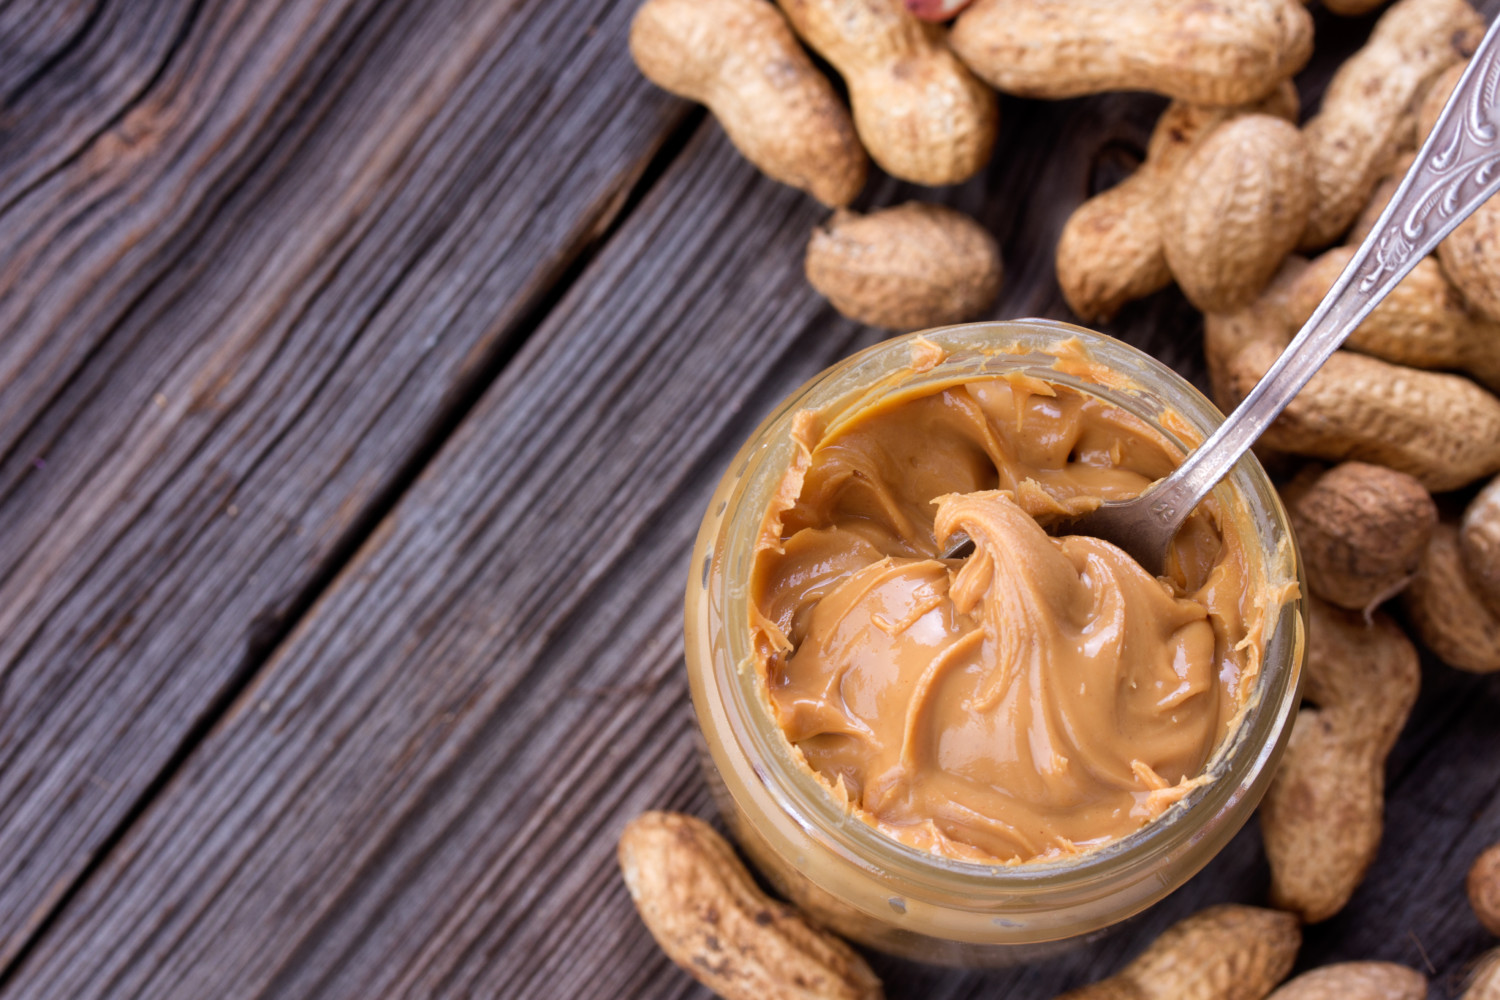 Fresh made creamy Peanut Butter in a glass jar and peanuts on old wooden table.